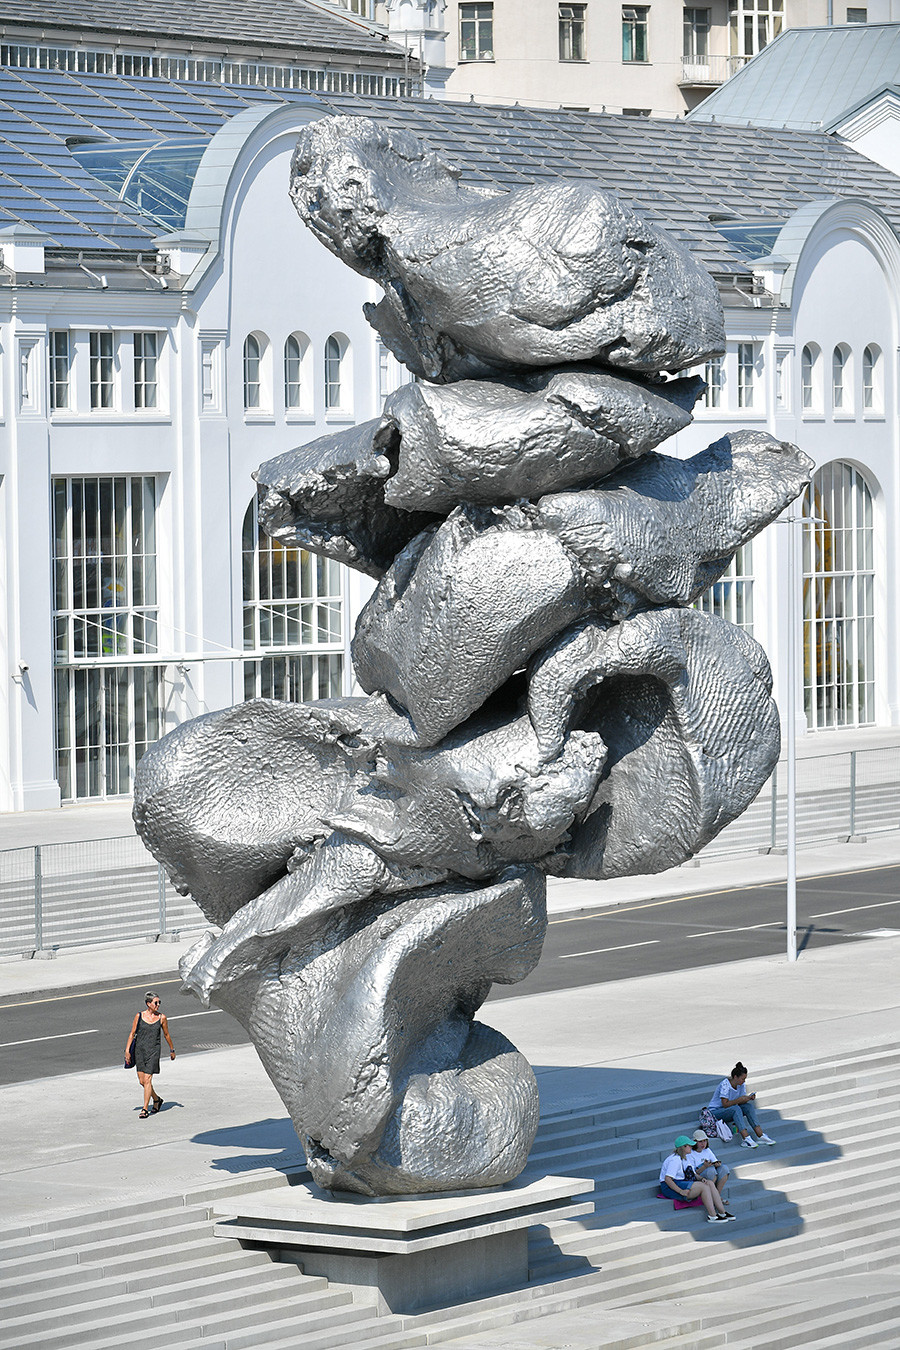 The sculpture symbolizes raw material and all that can come of it in the future